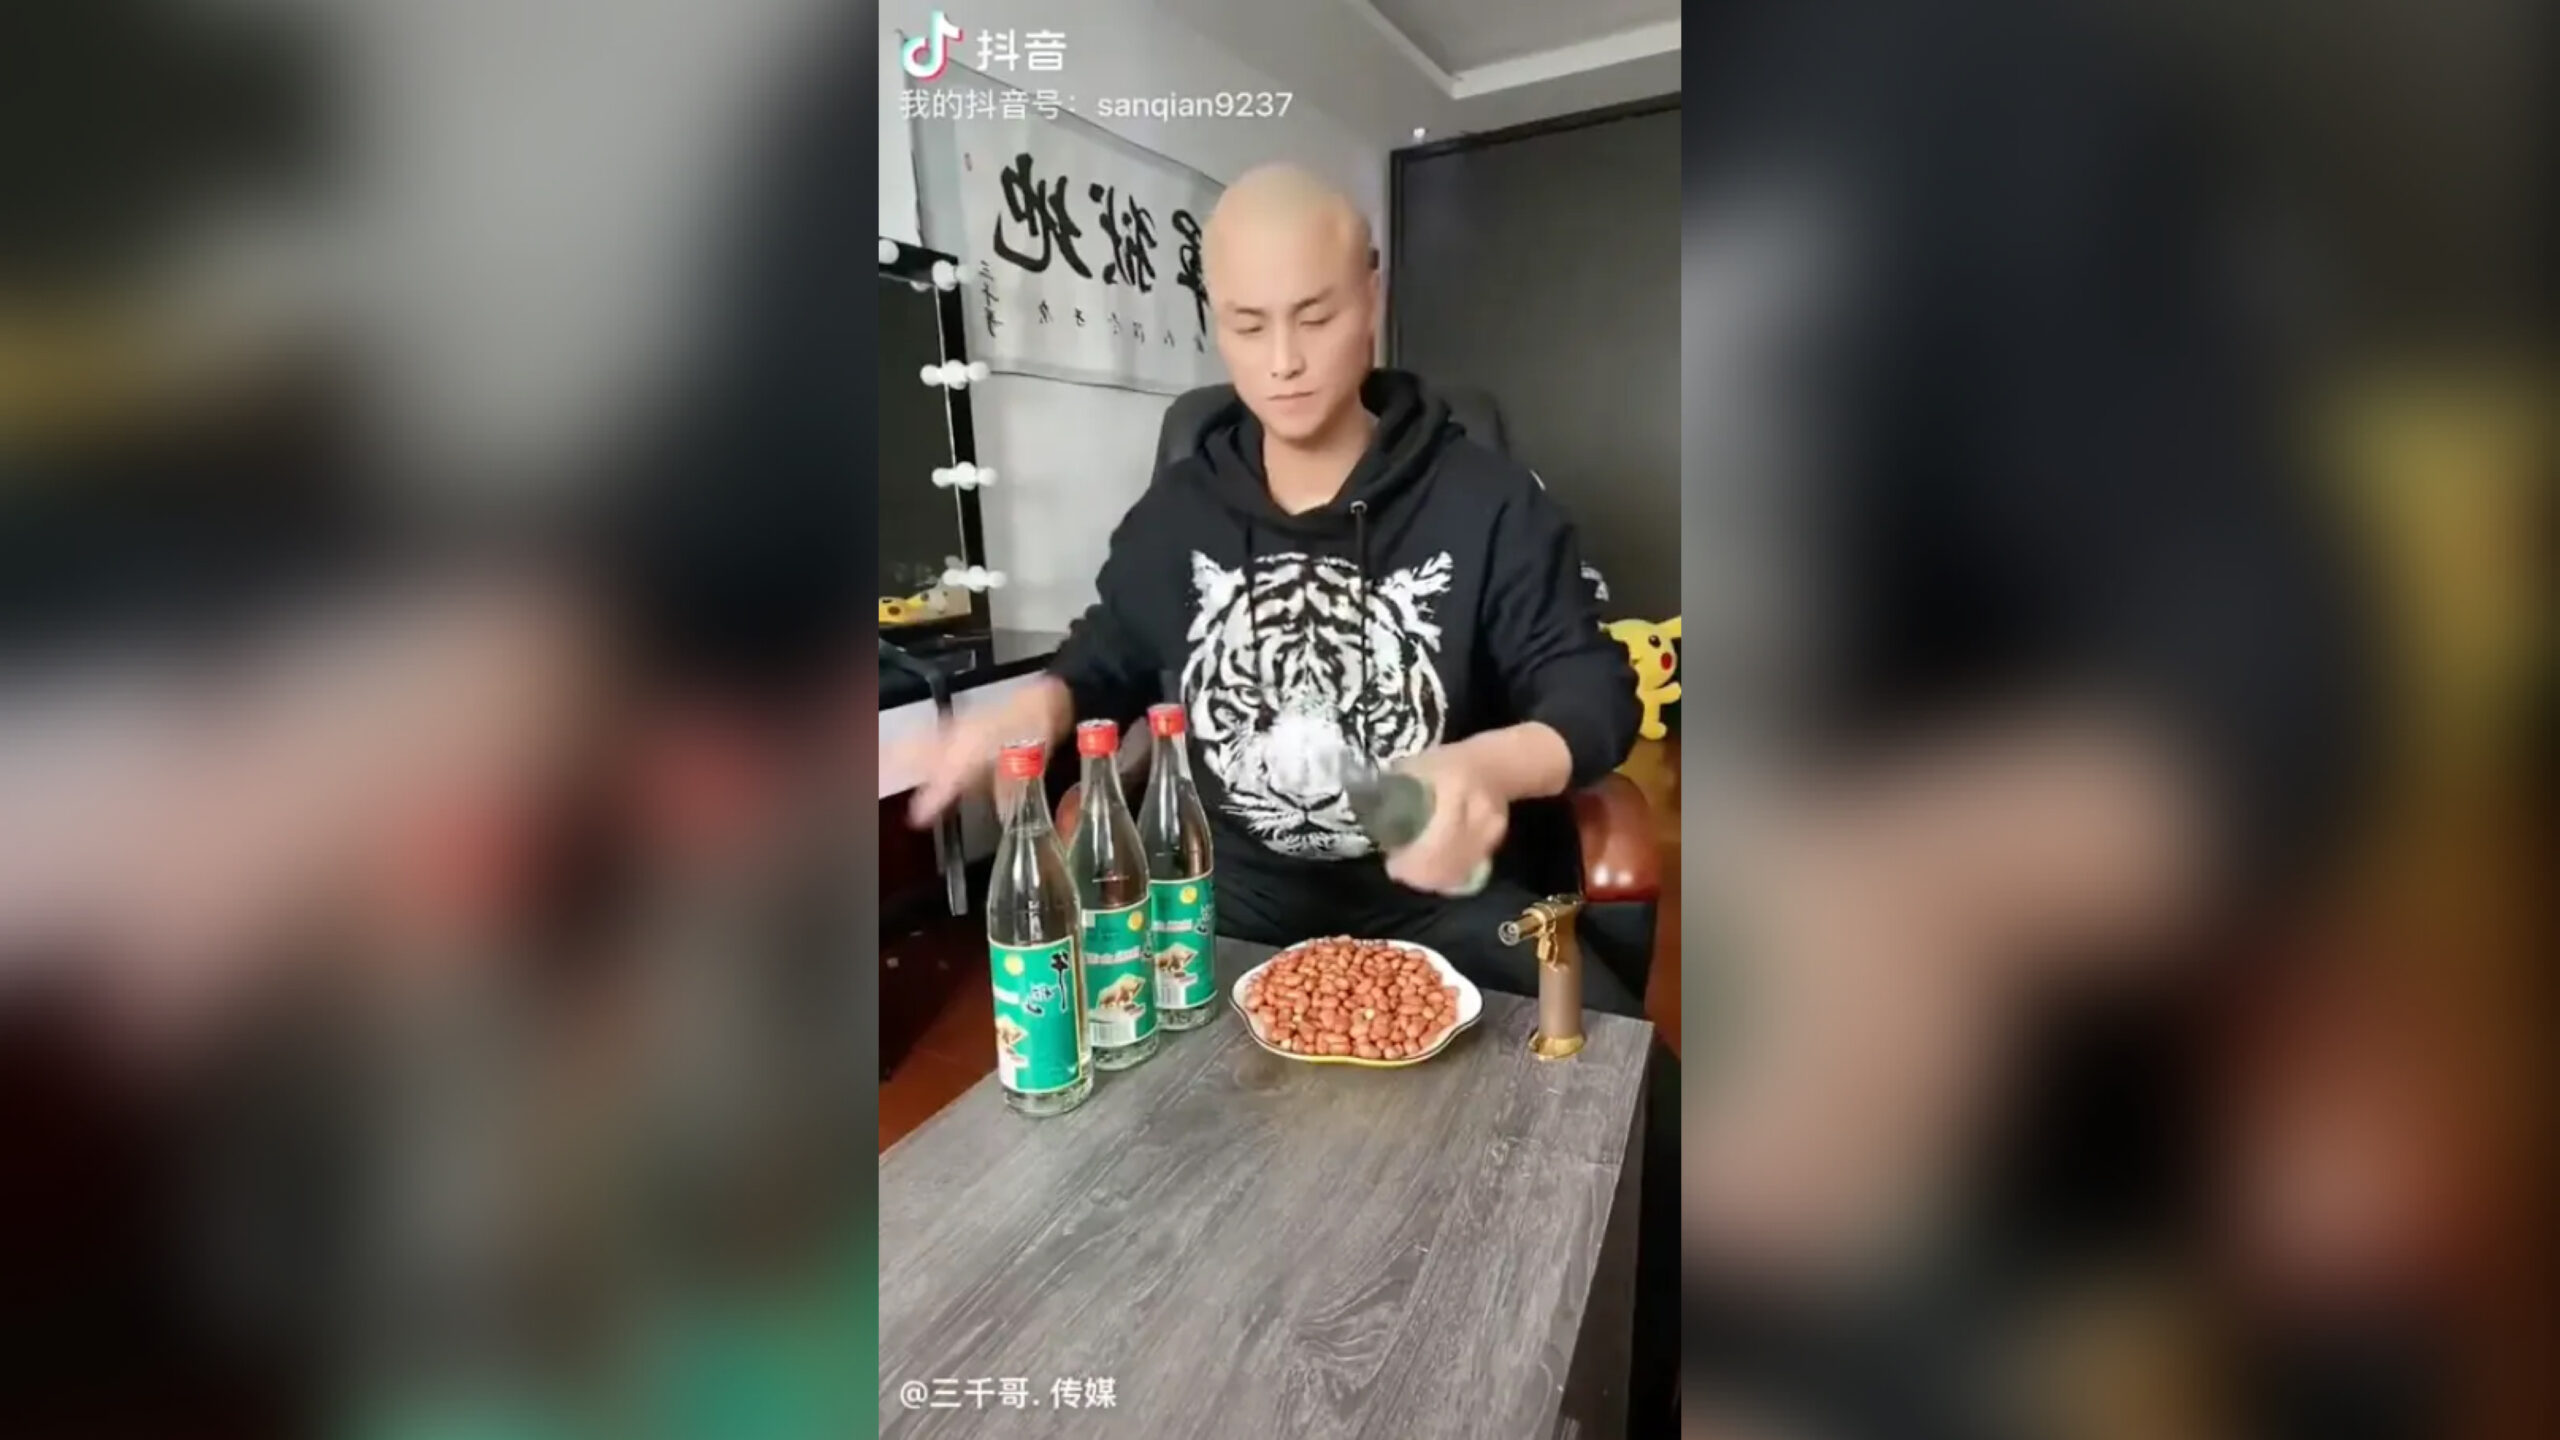 Chinese Influencer Dies After Binge Drinking on Livestream, Reports Say